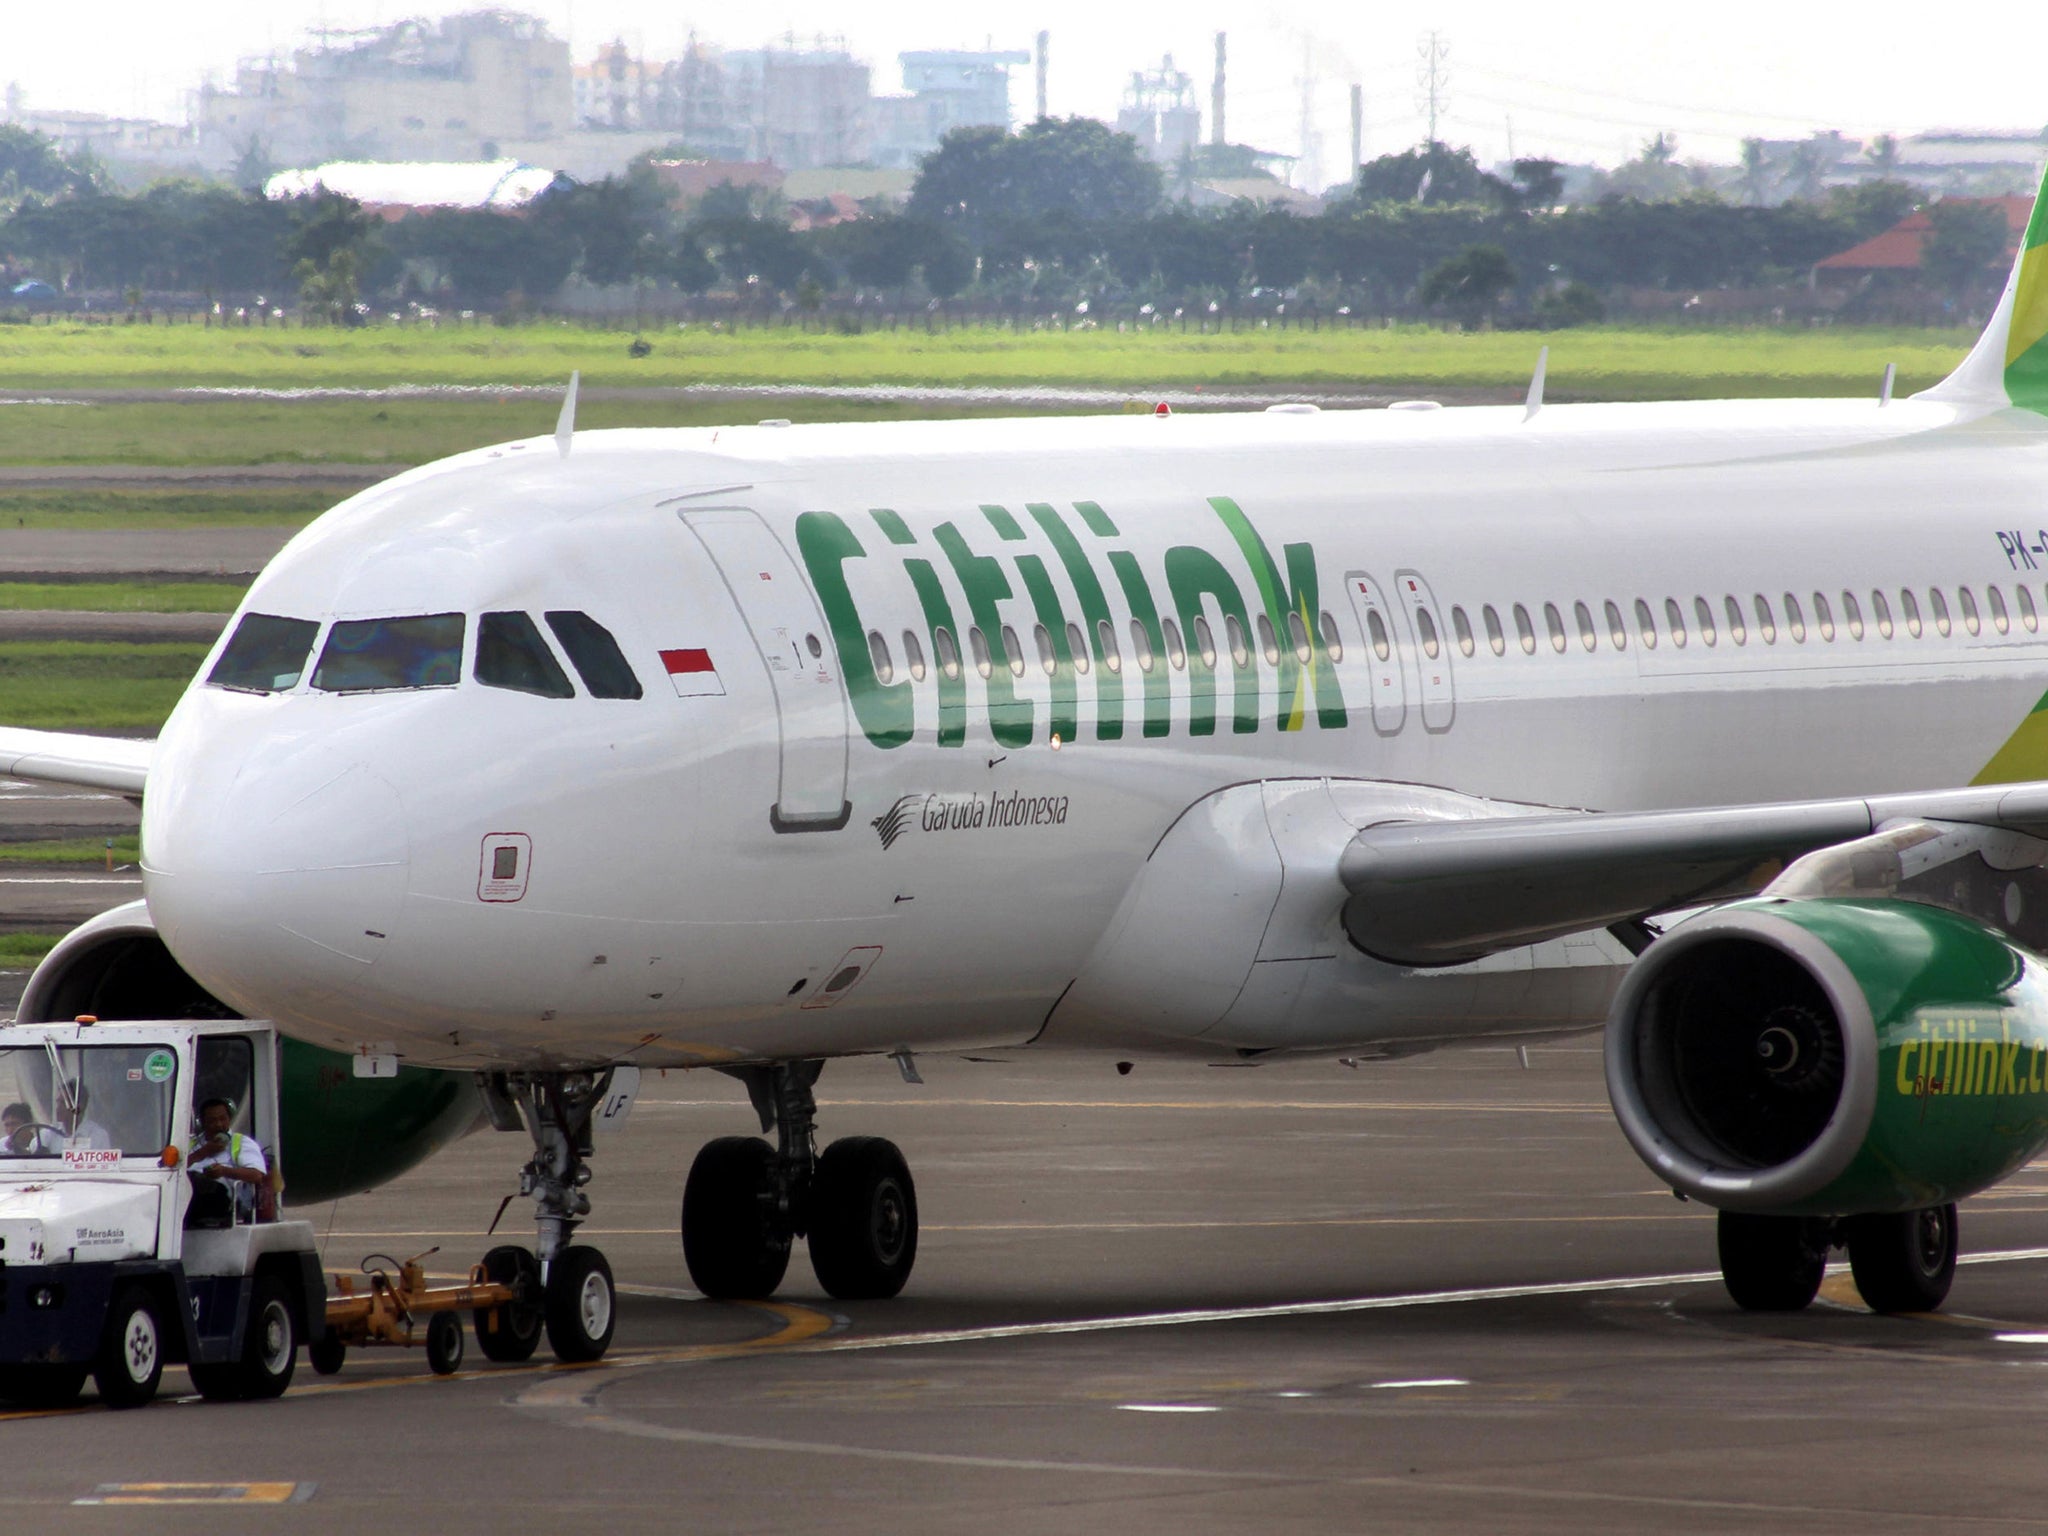 The incident reportedly happened on a Citilink flight